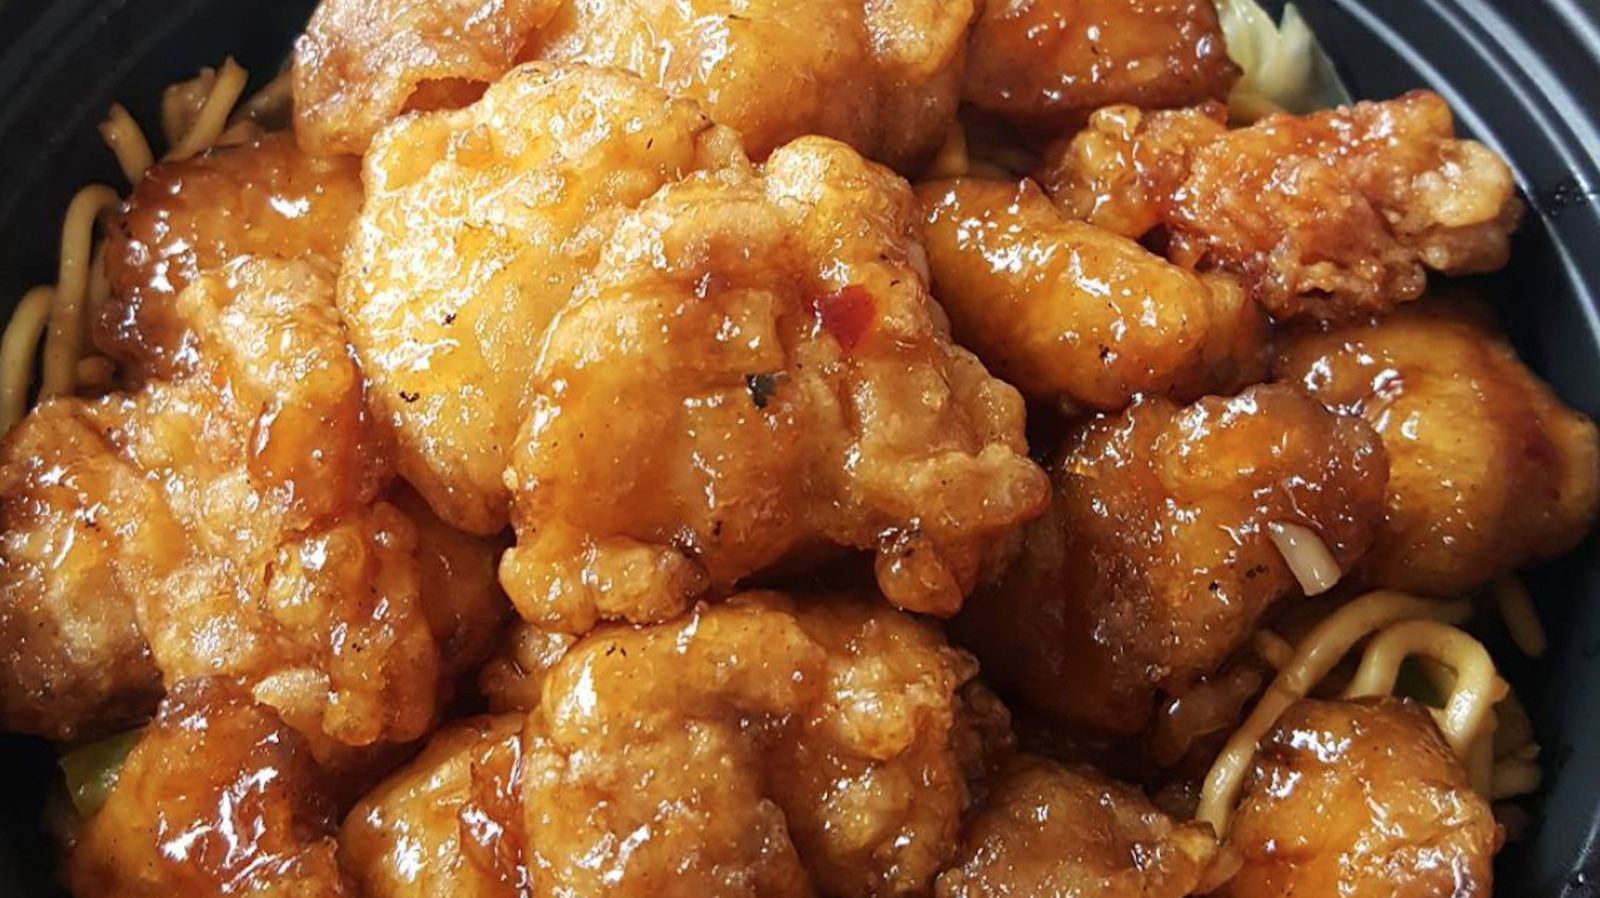 Panda Express Orange Chicken What To Know Before Ordering